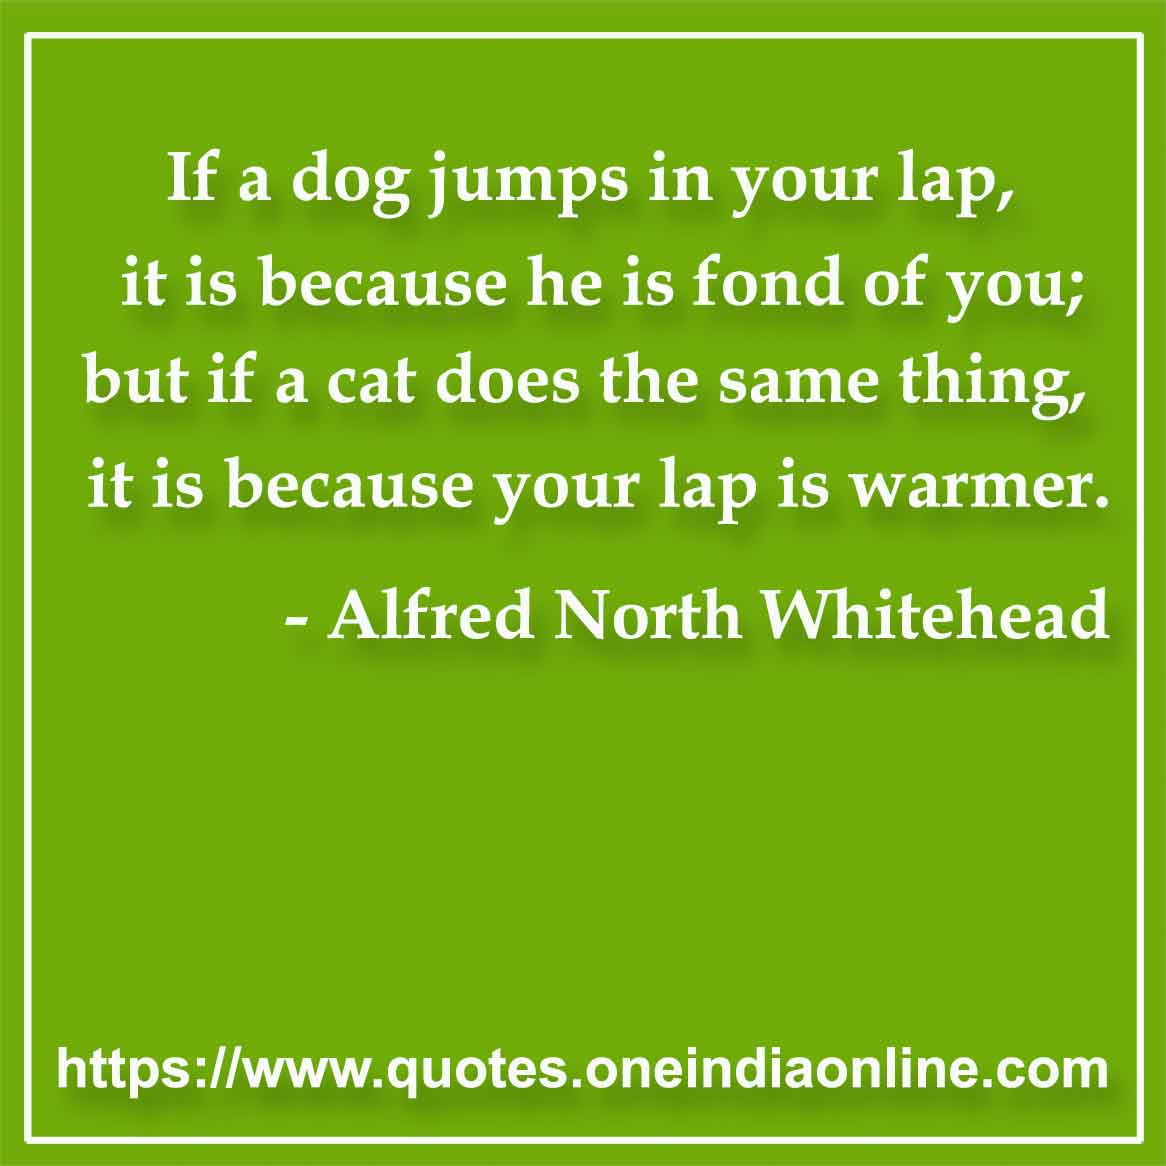 If a dog jumps in your lap, it is because he is fond of you; but if a cat does the same thing, it is because your lap is warmer.

- Pet Quotes by Alfred North Whitehead